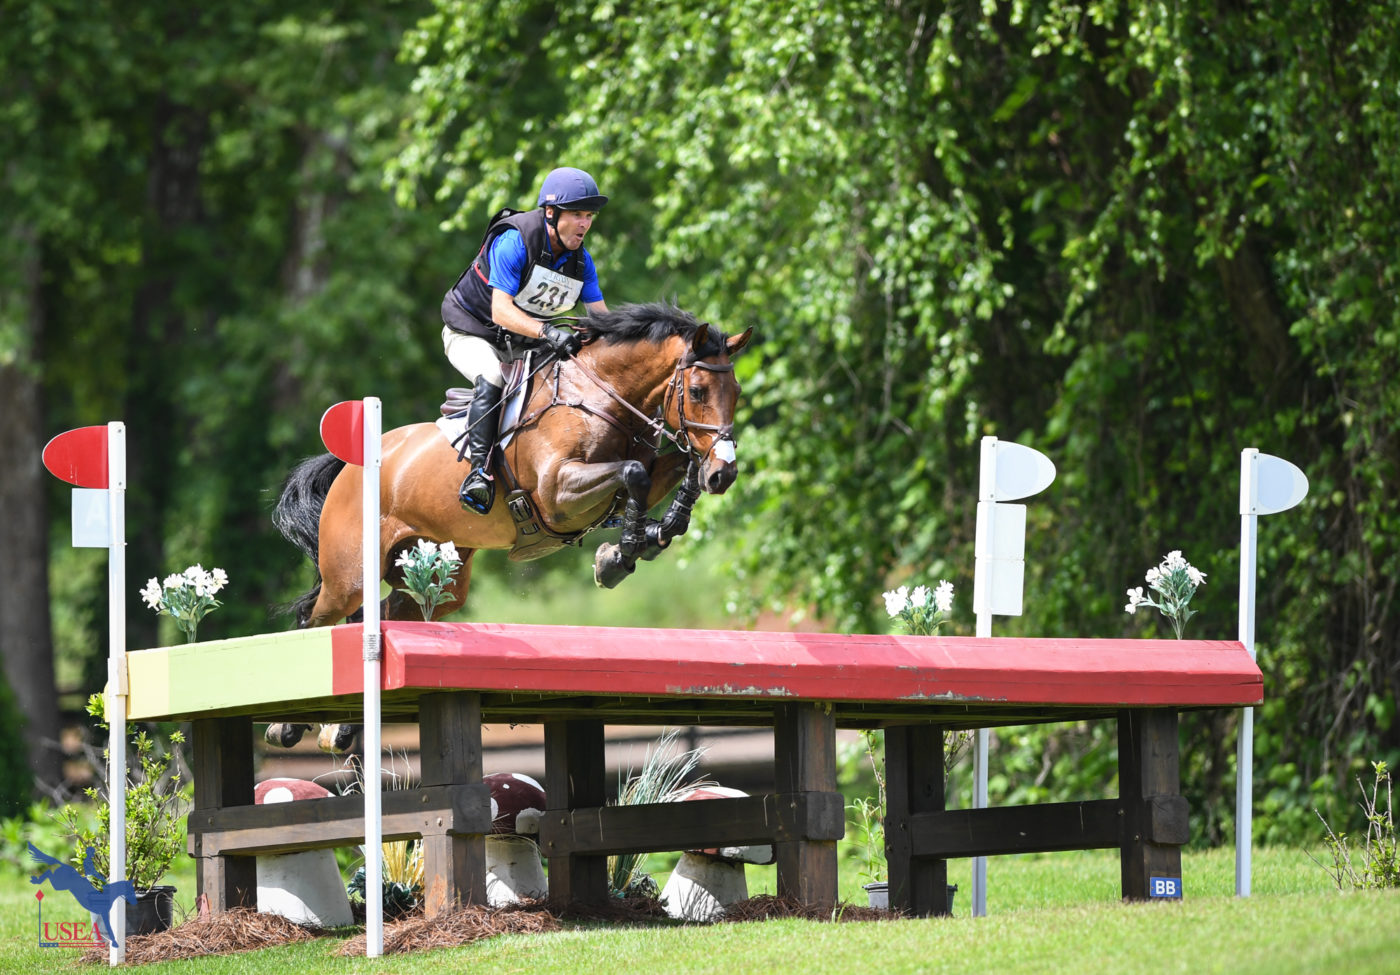 Denim wasn't going to touch this table with Phillip Dutton in the CCI4*-S. USEA/Lindsay Berreth photo